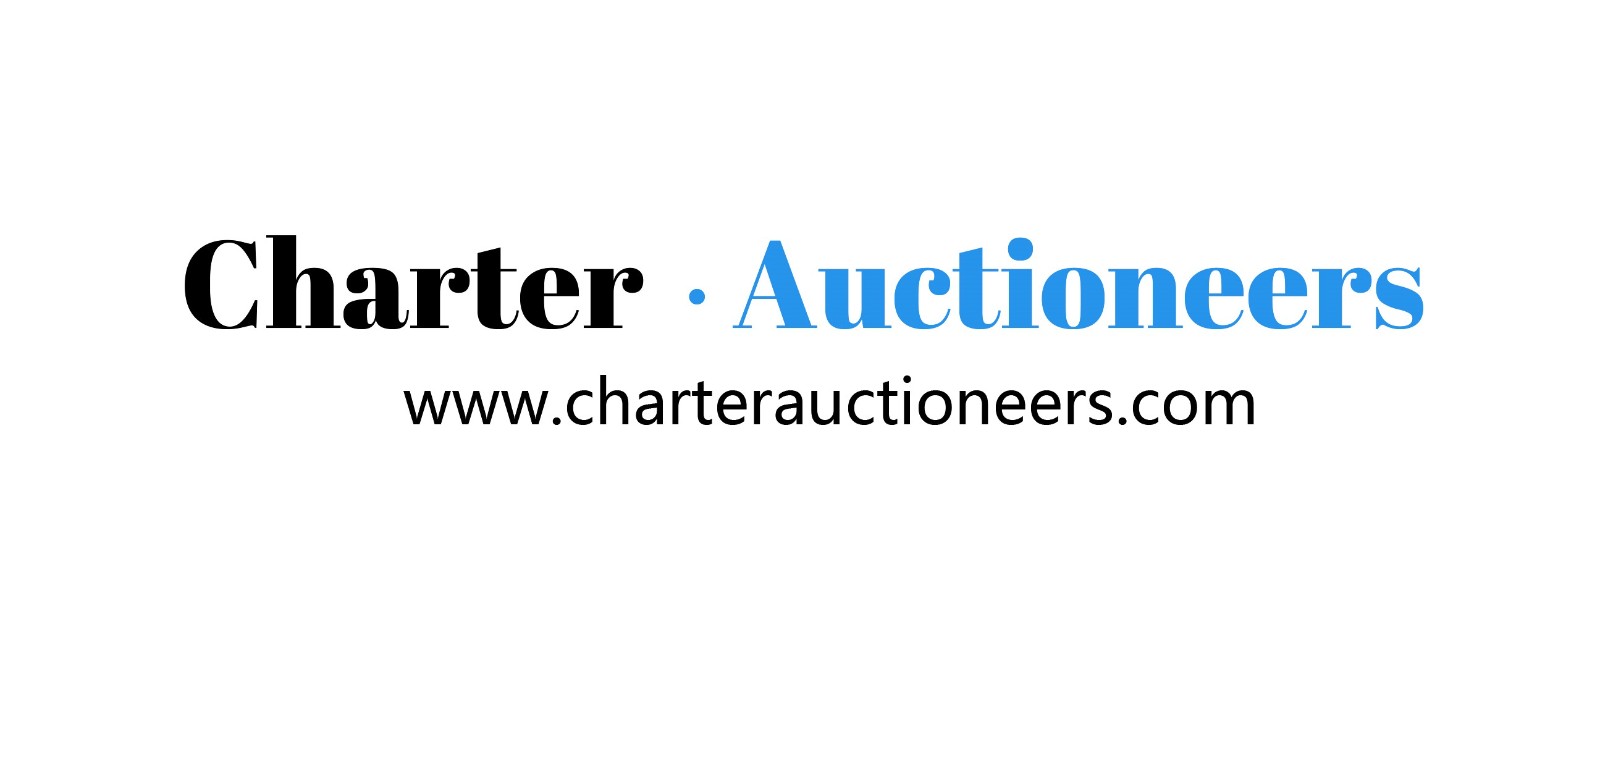 Charter Auctioneers